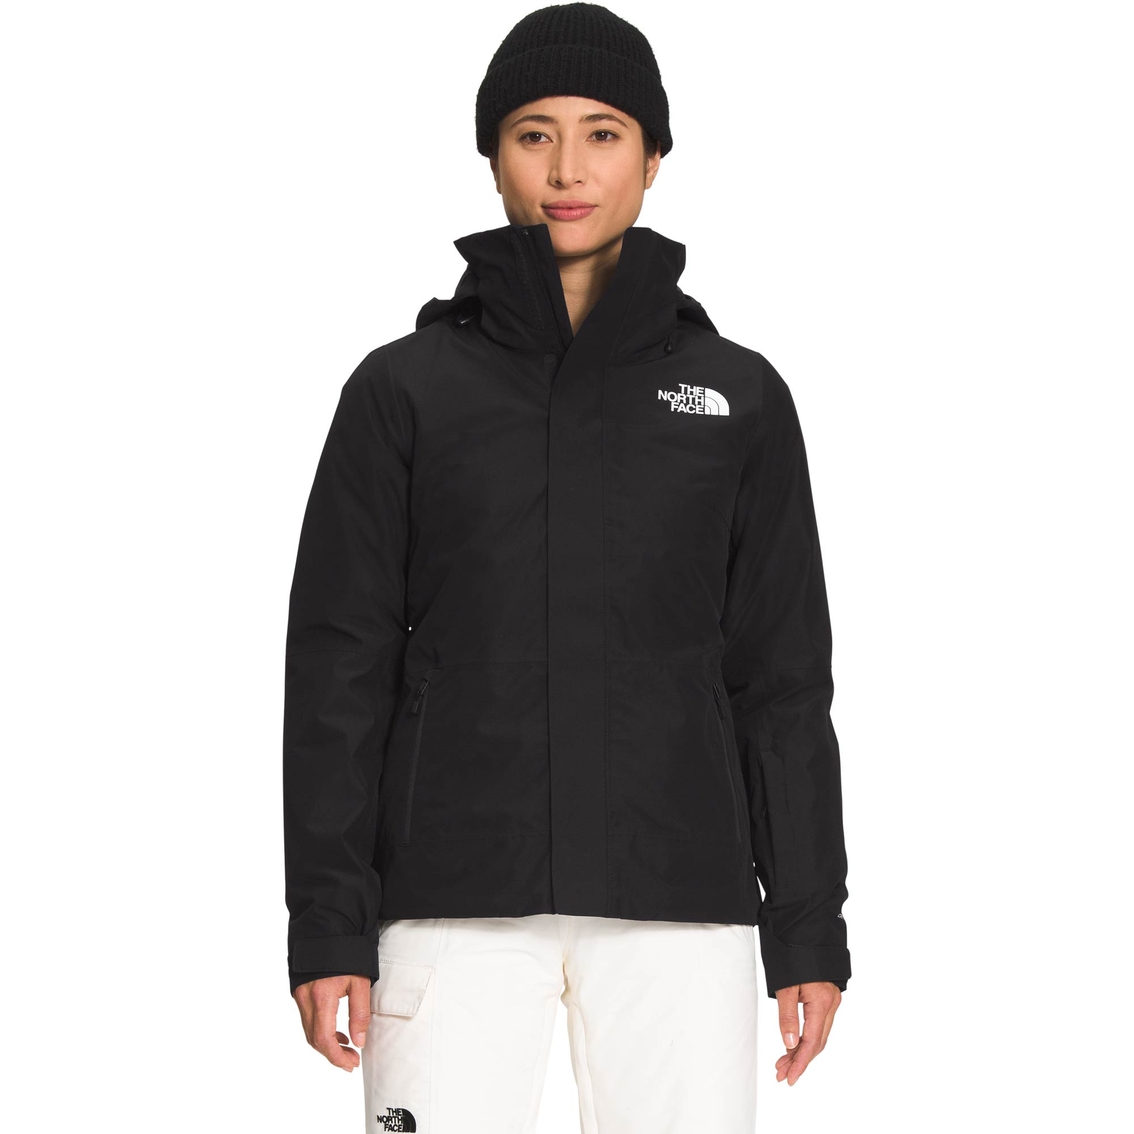 The North Face Garner Triclimate Jacket | Jackets | Clothing ...